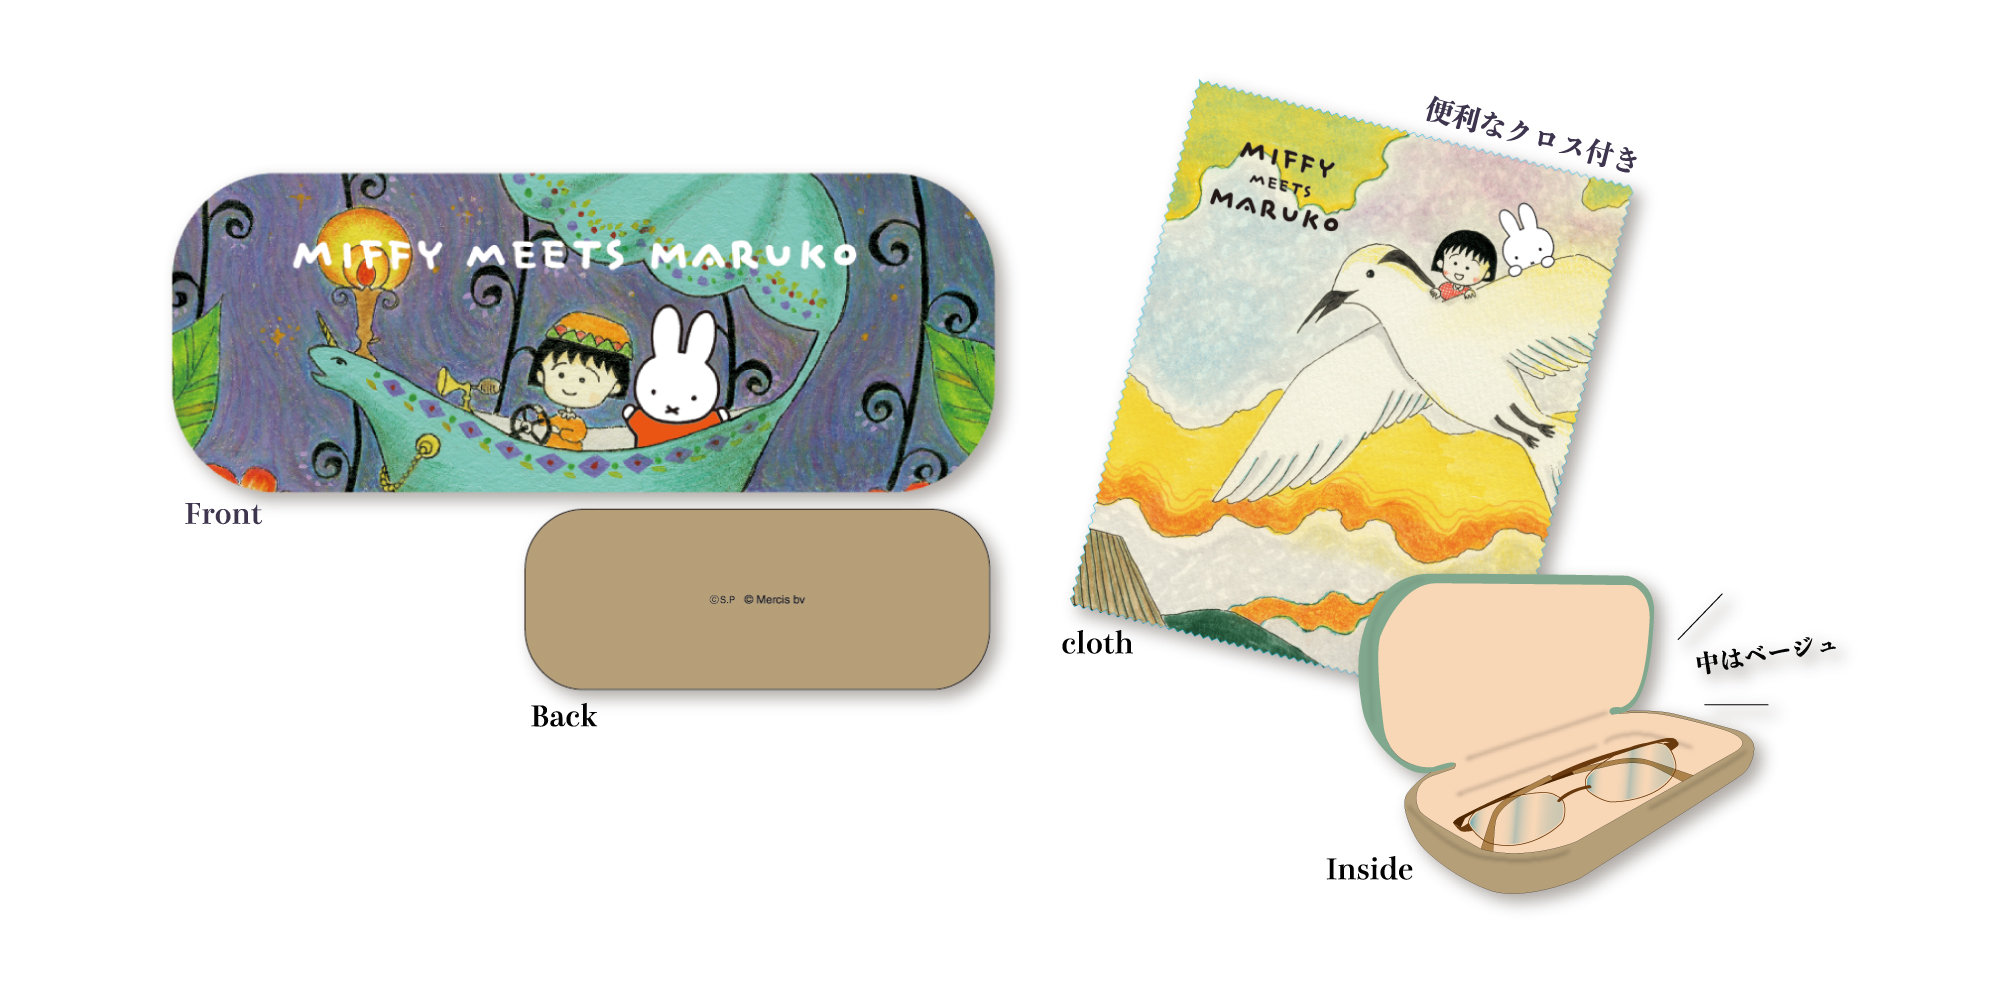 Miffy Book-Style Sticky Notes by Square (Miffy Meets Maruko Series